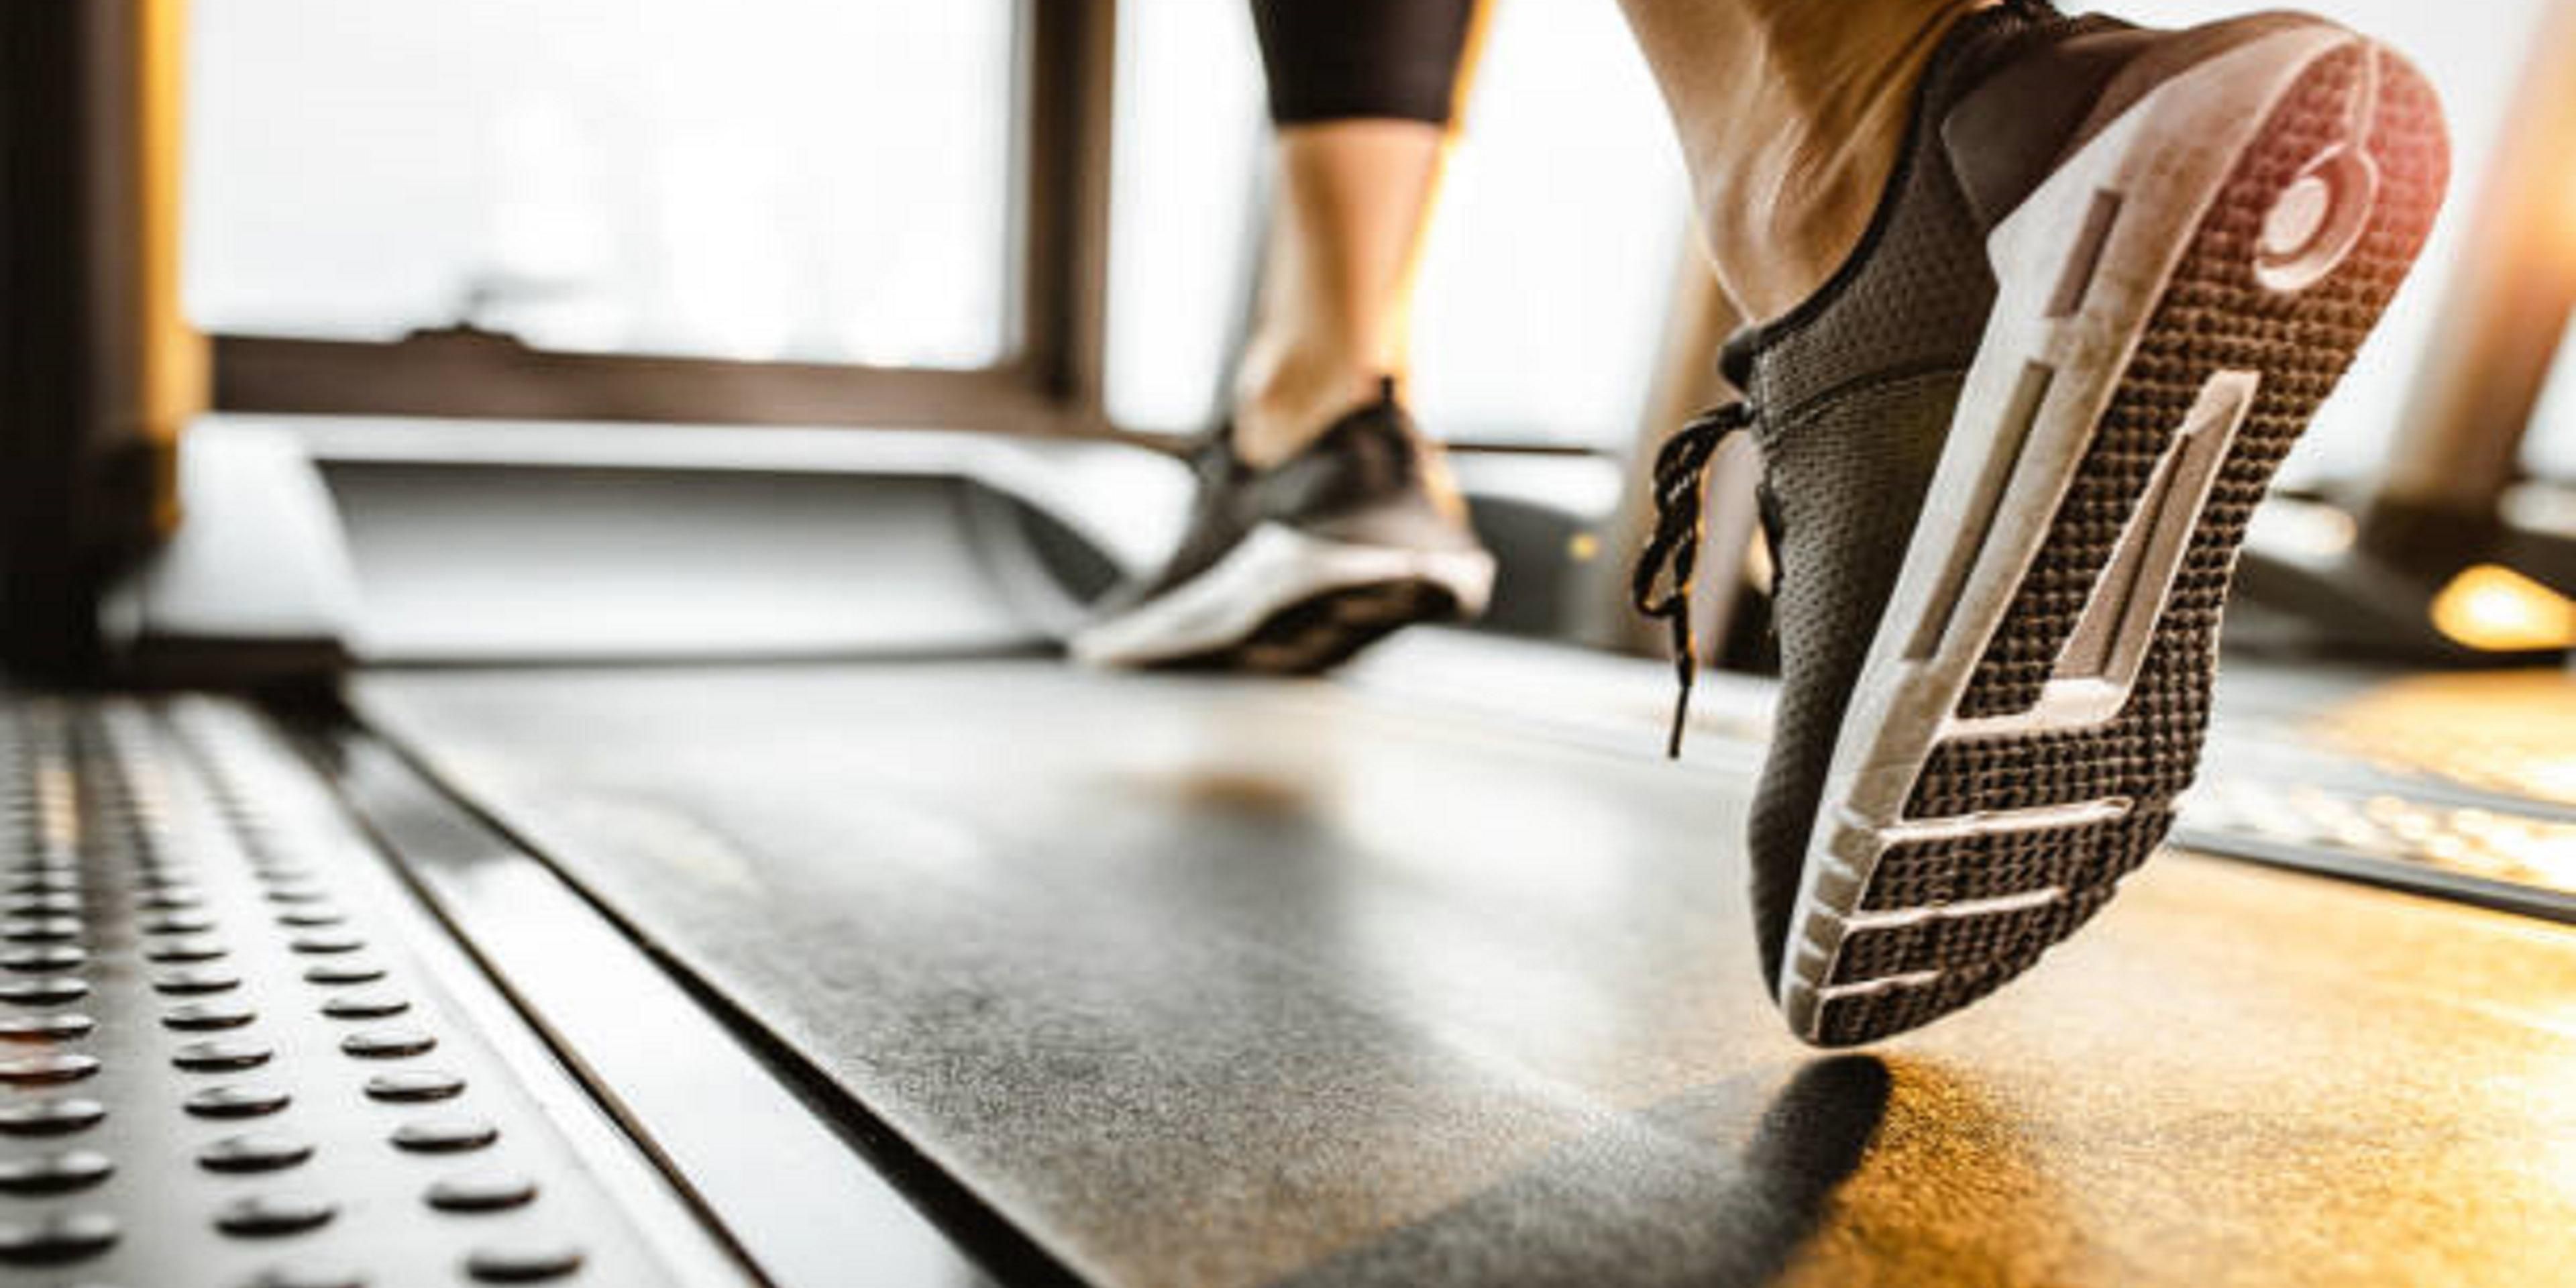 Get your sweat on in our complimentary, fully equipped Fitness Center featuring Precor equipment open 24 hours a day.